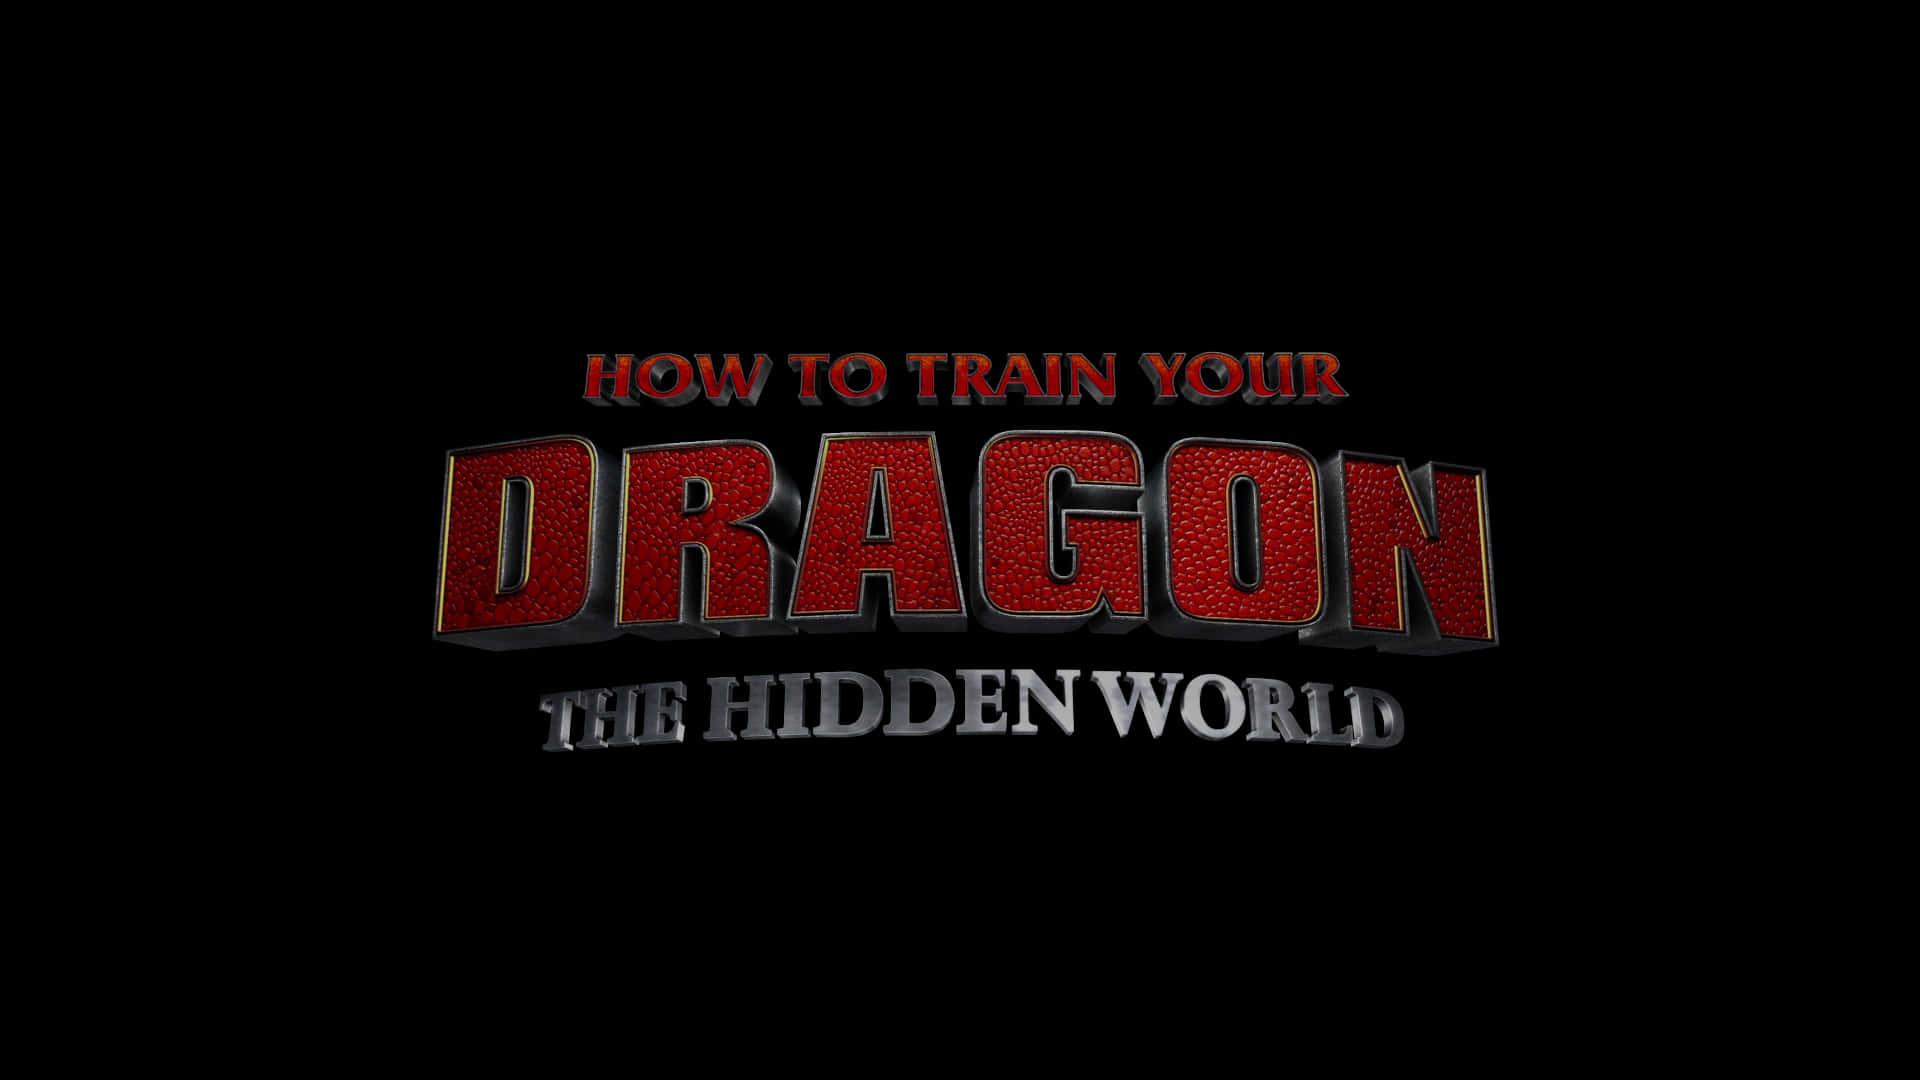 How To Train Your Dragon The Hidden World Show Poster Wallpaper